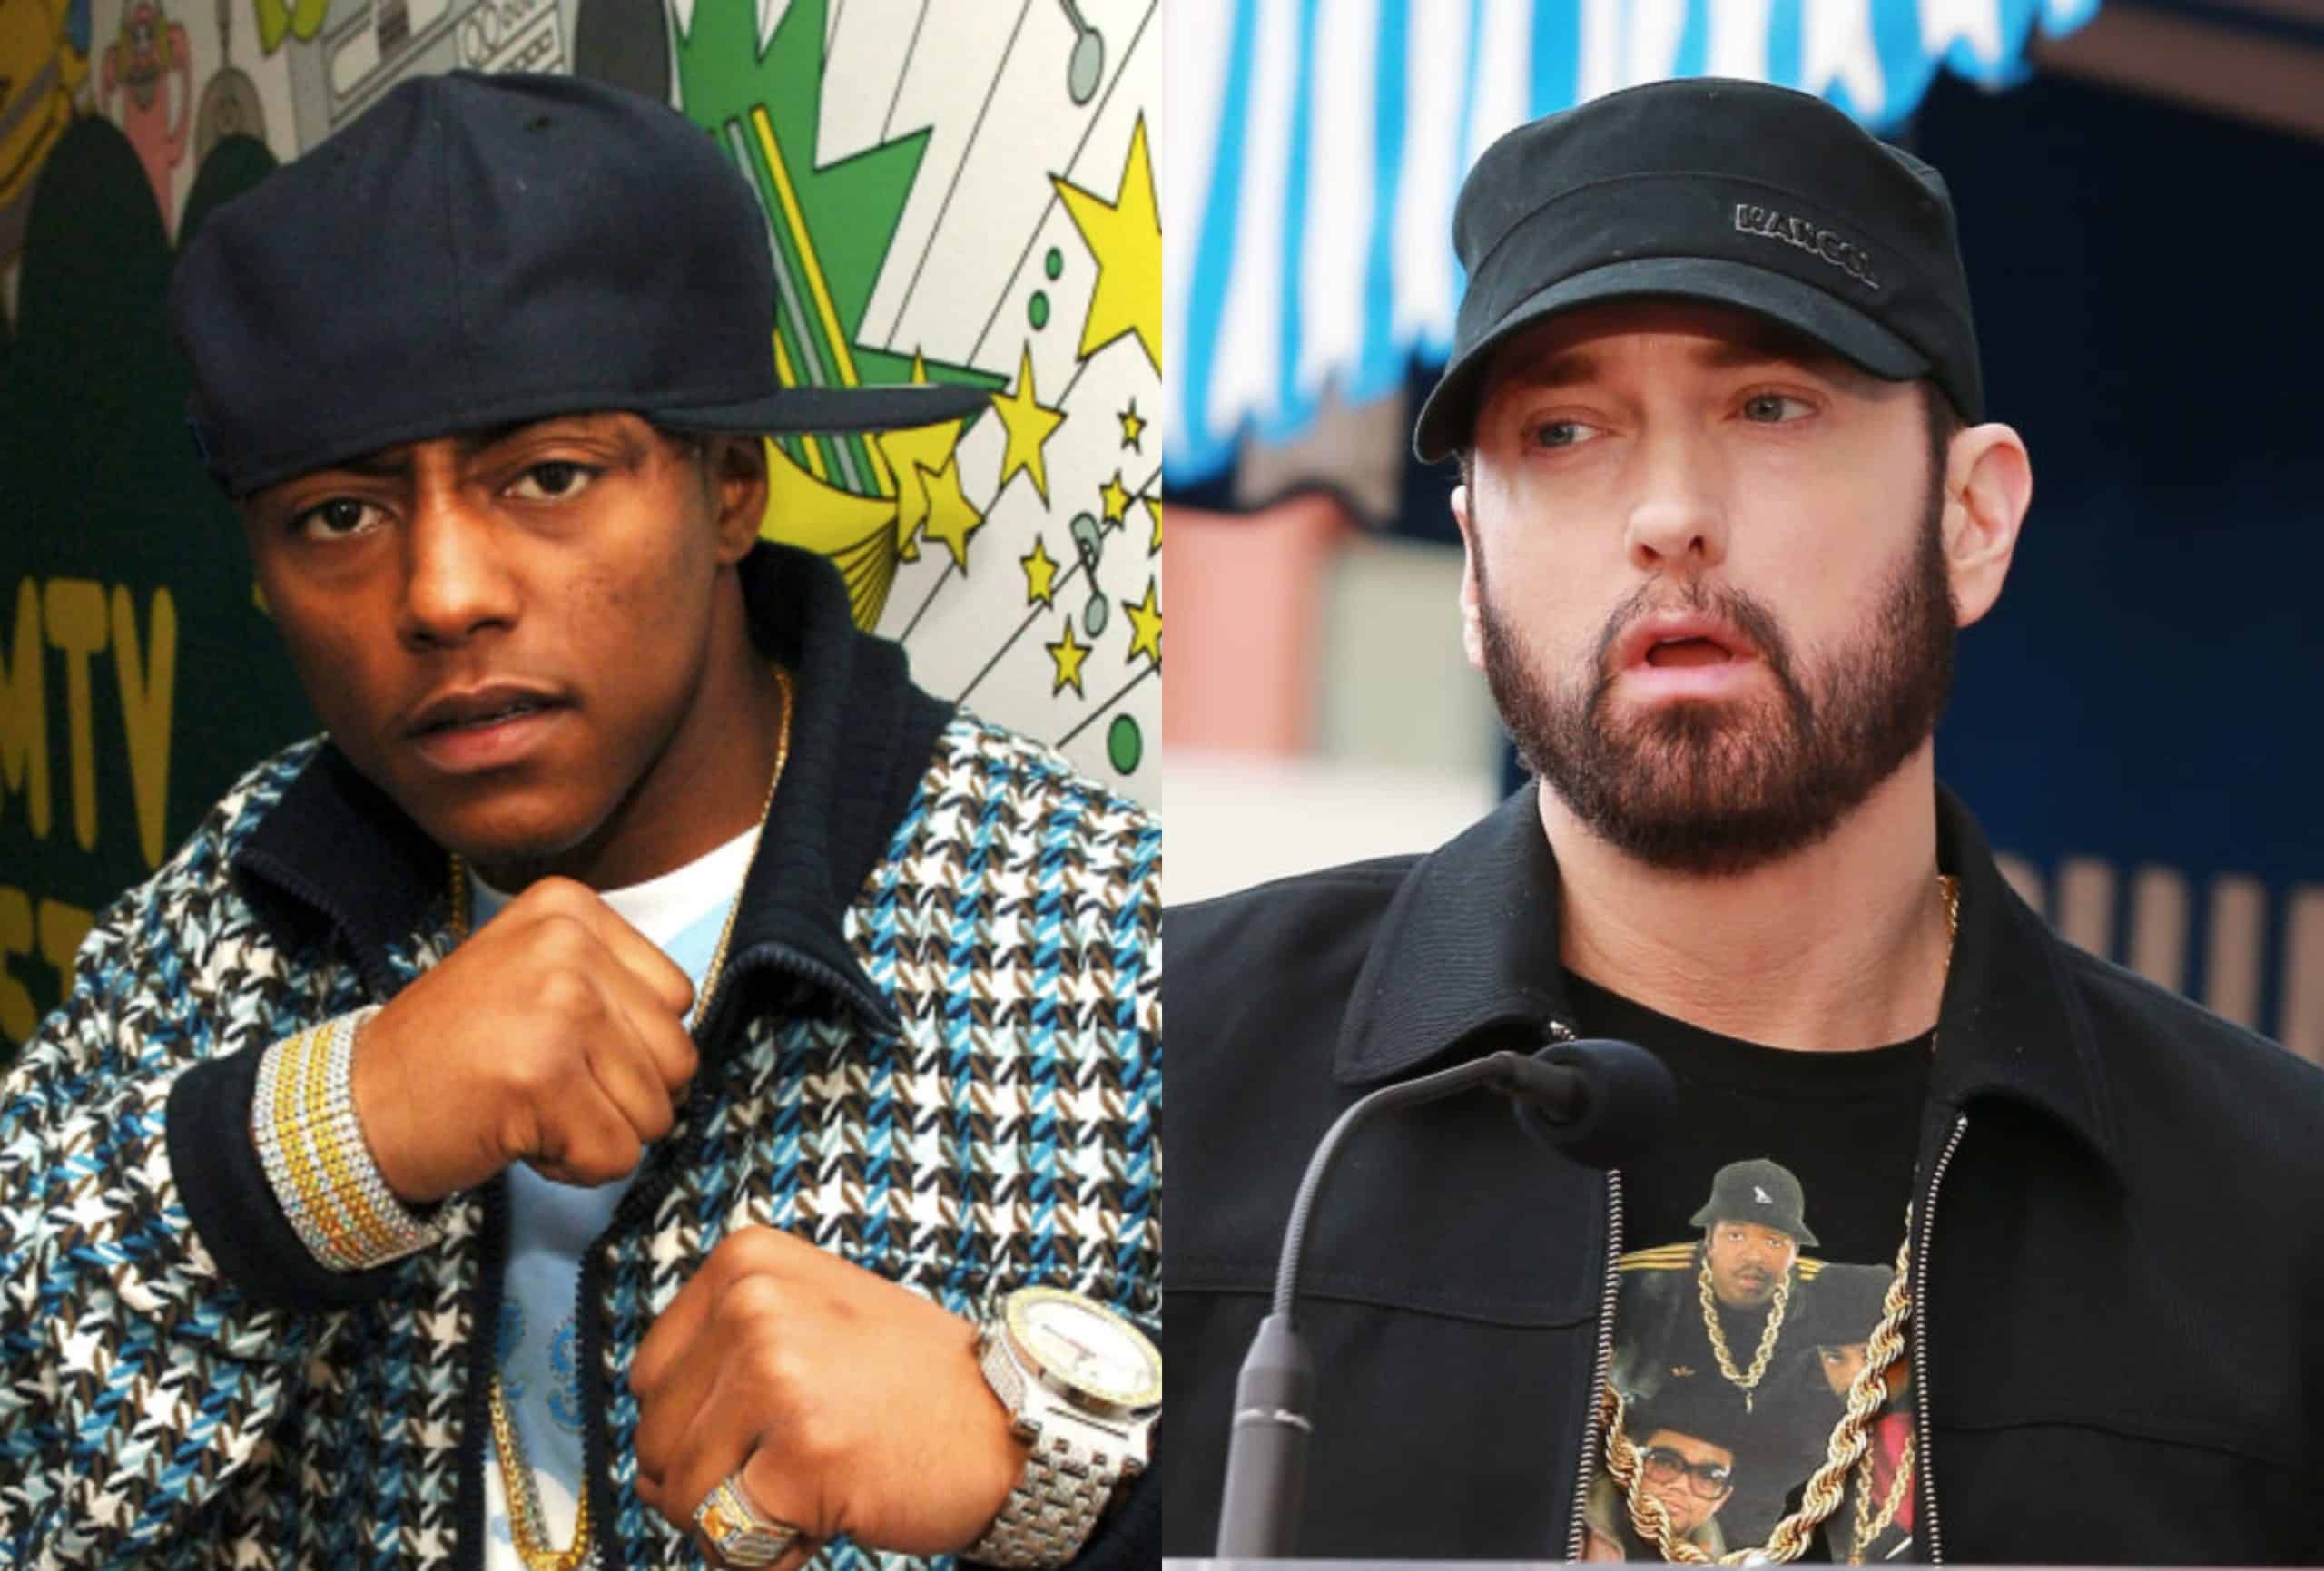 Cassidy Says The Only Rap Battle That Would Excite Him is with Eminem